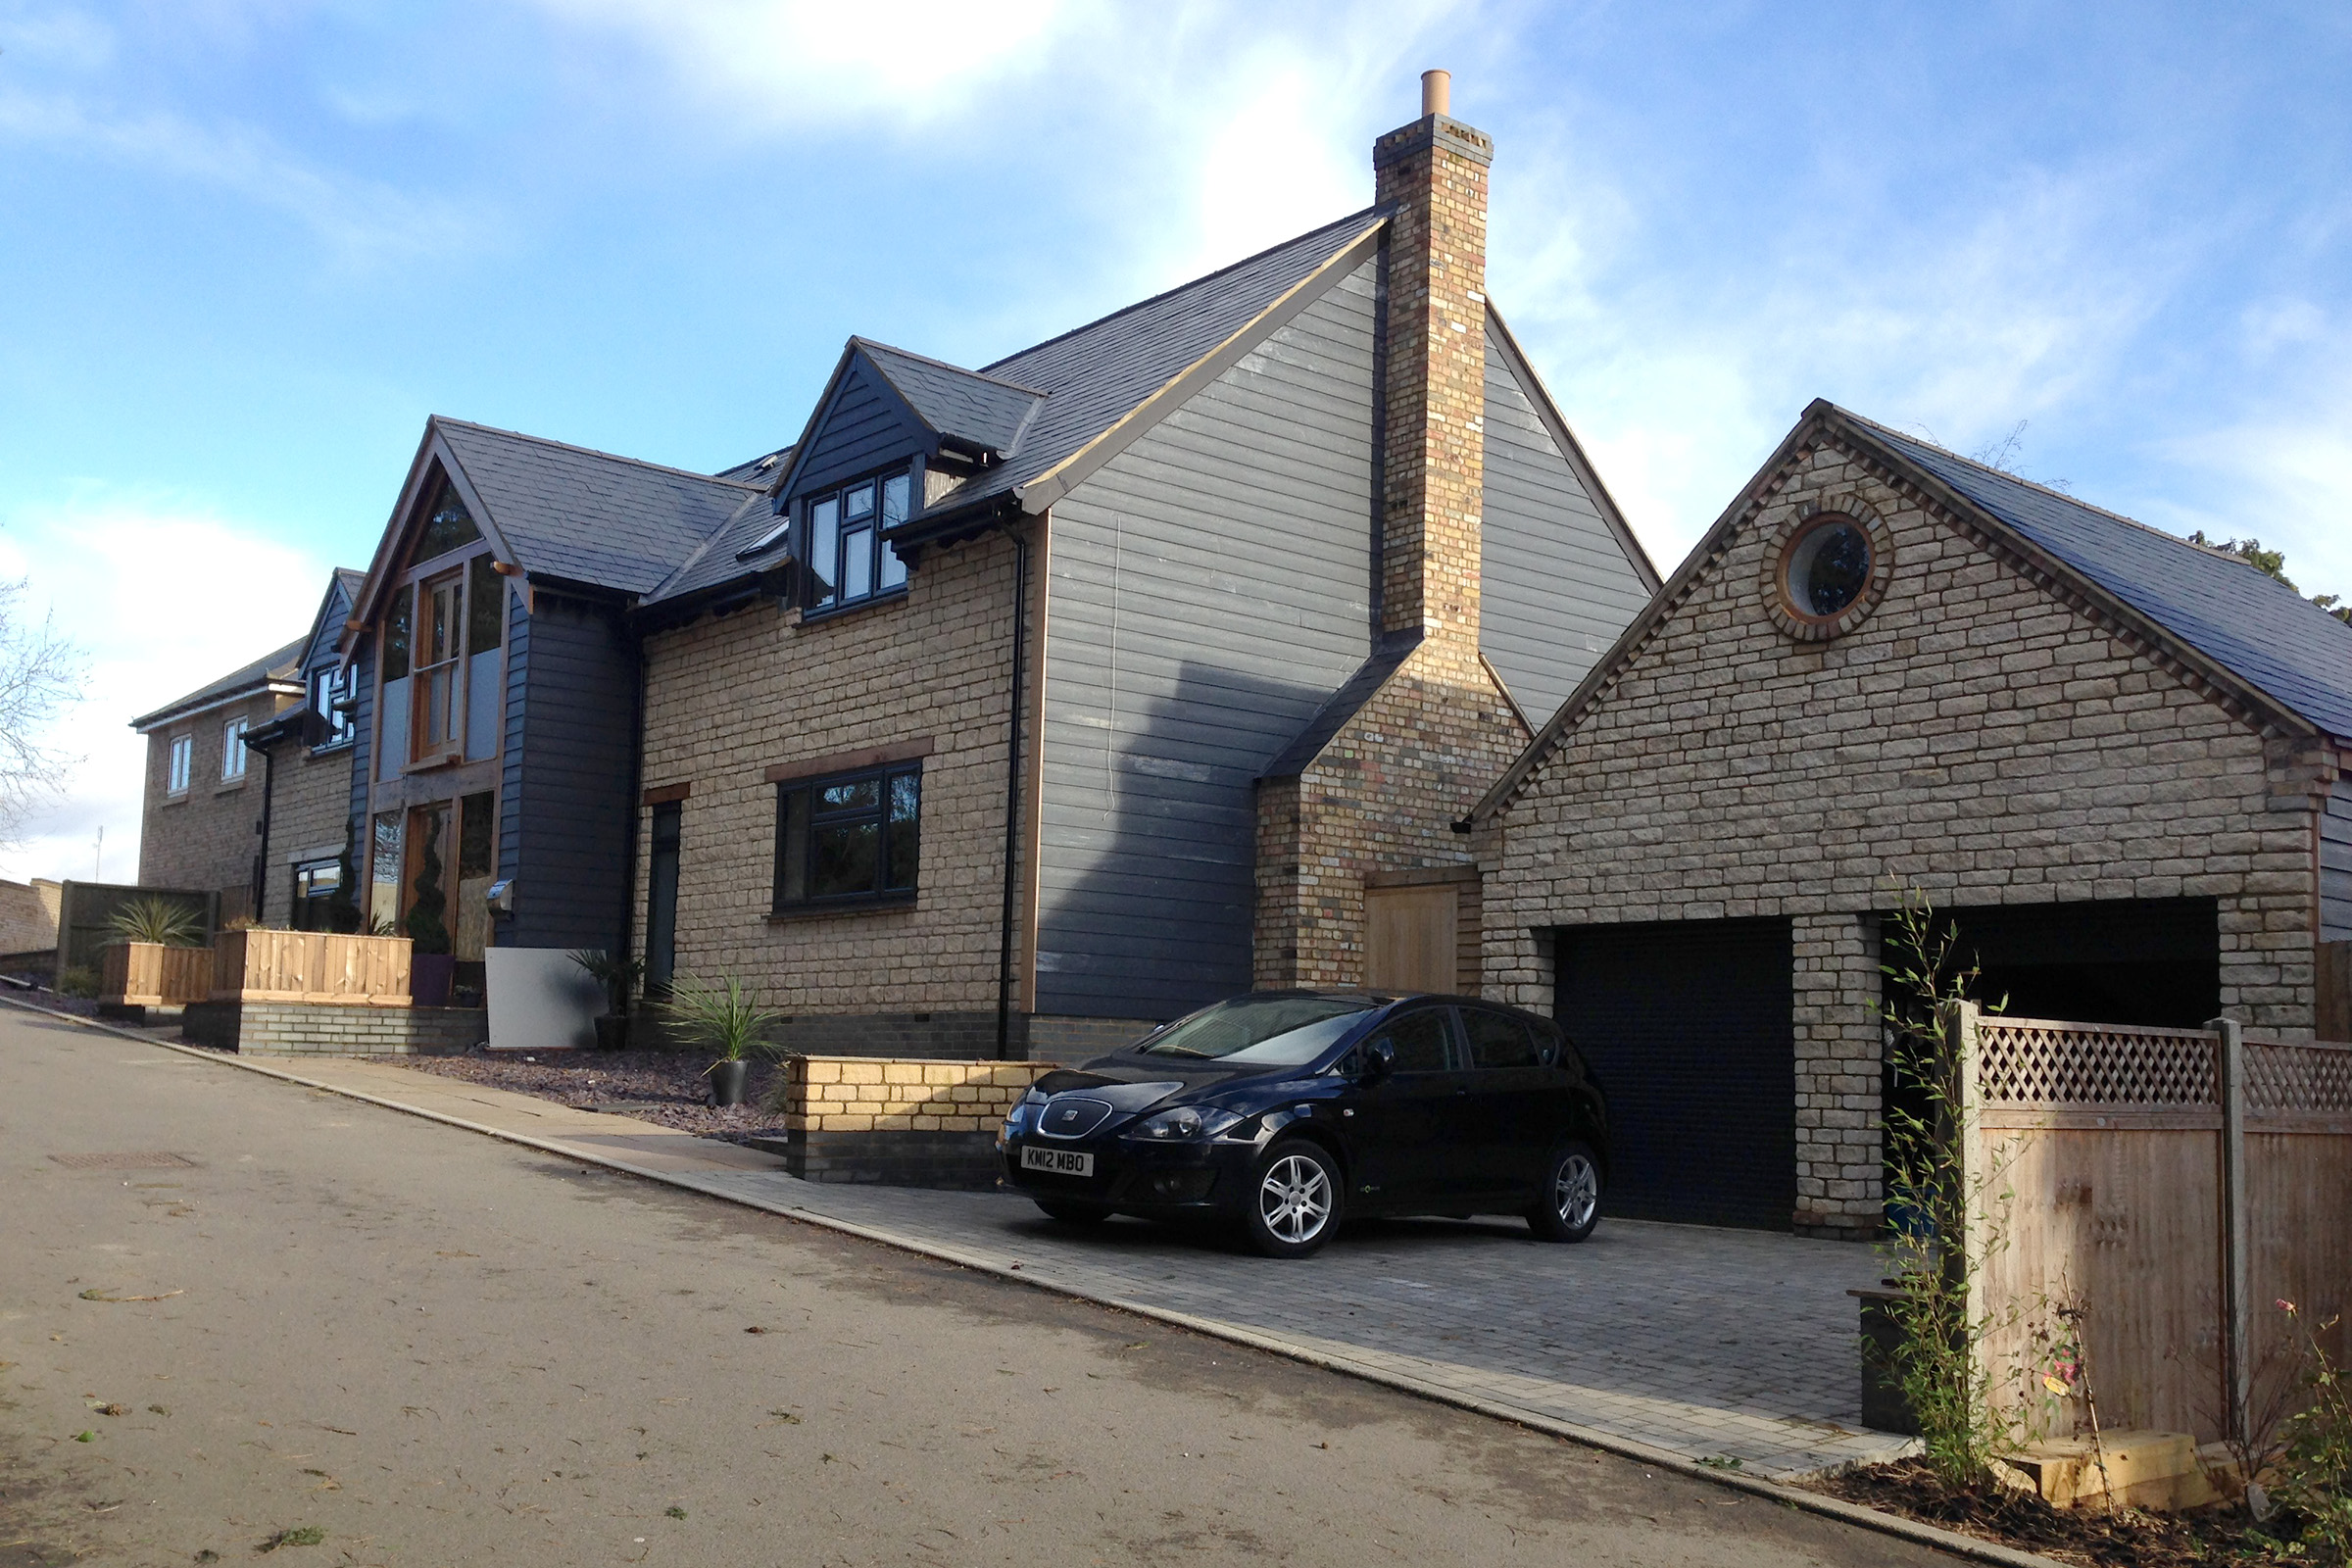 A new build home in Brigstock, Northamptonshire